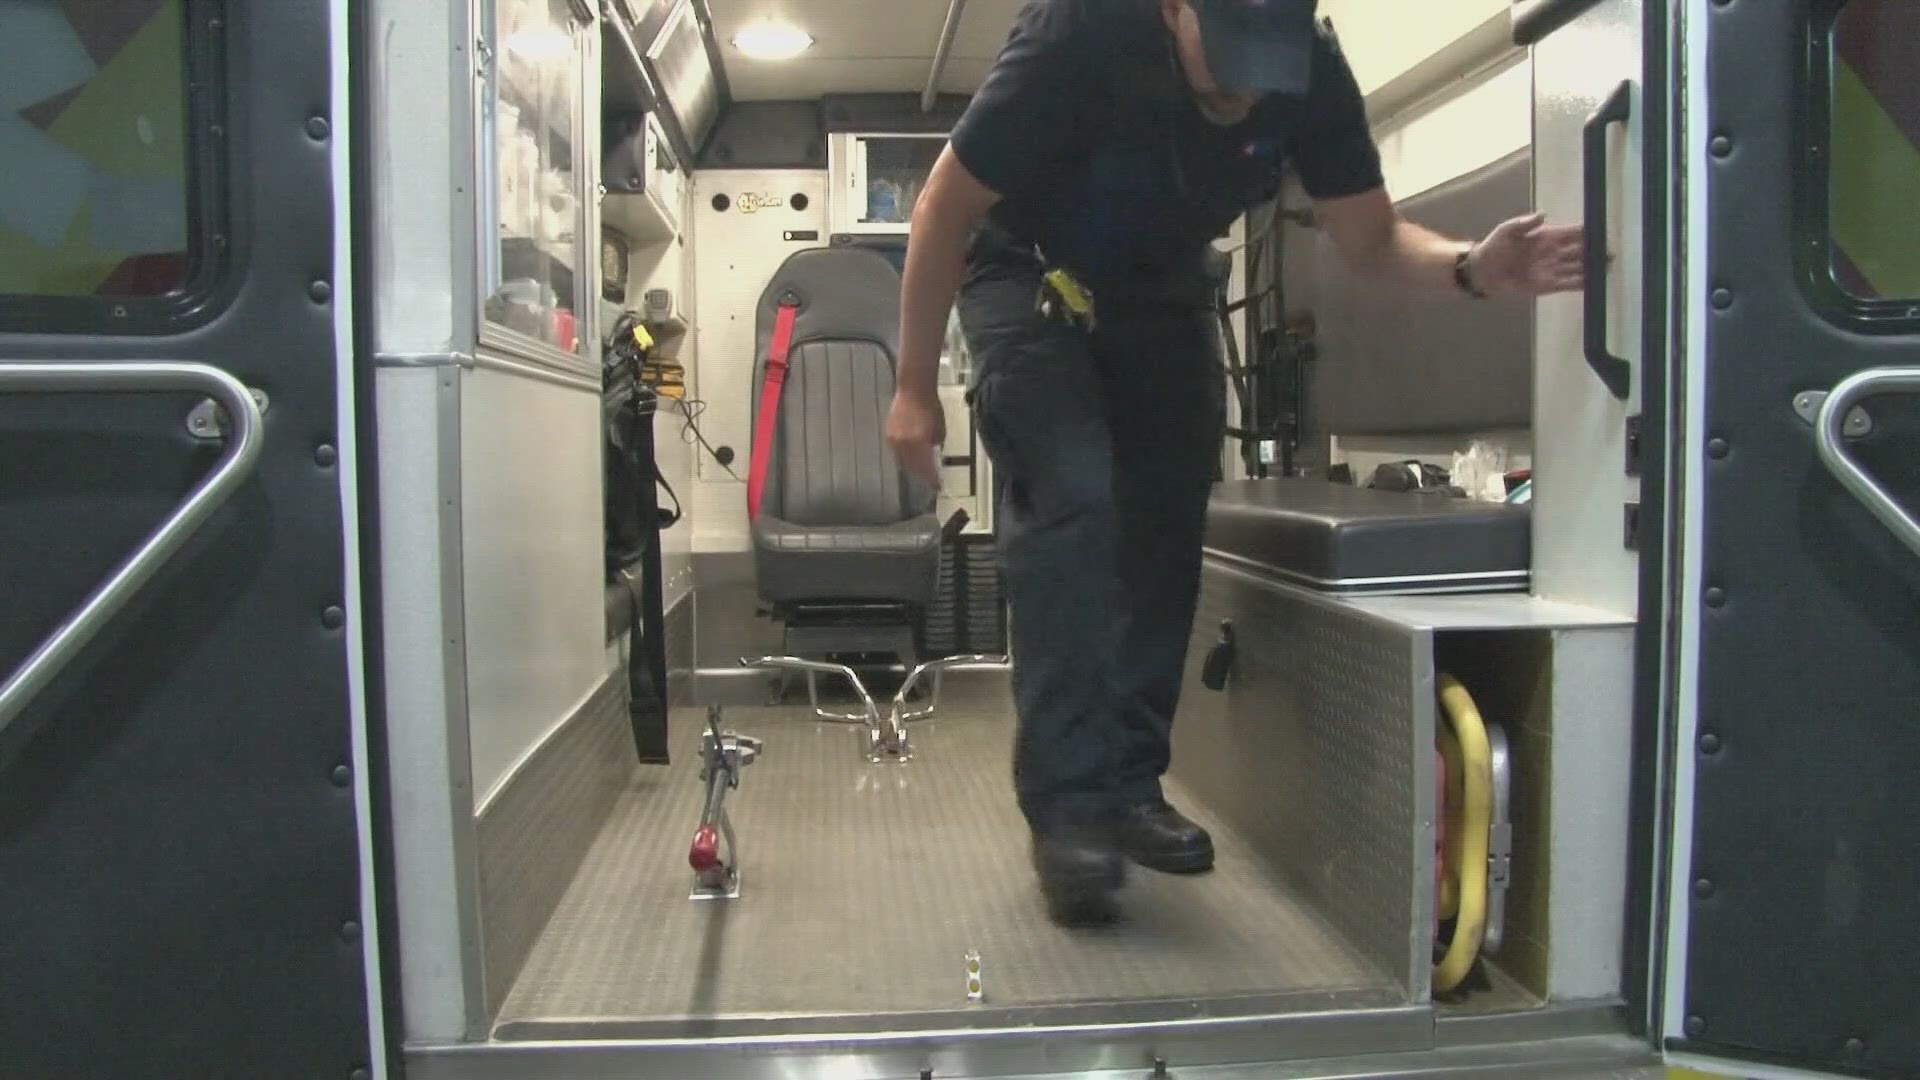 Knox County could choose to continue with AMR as the provider of EMS services.